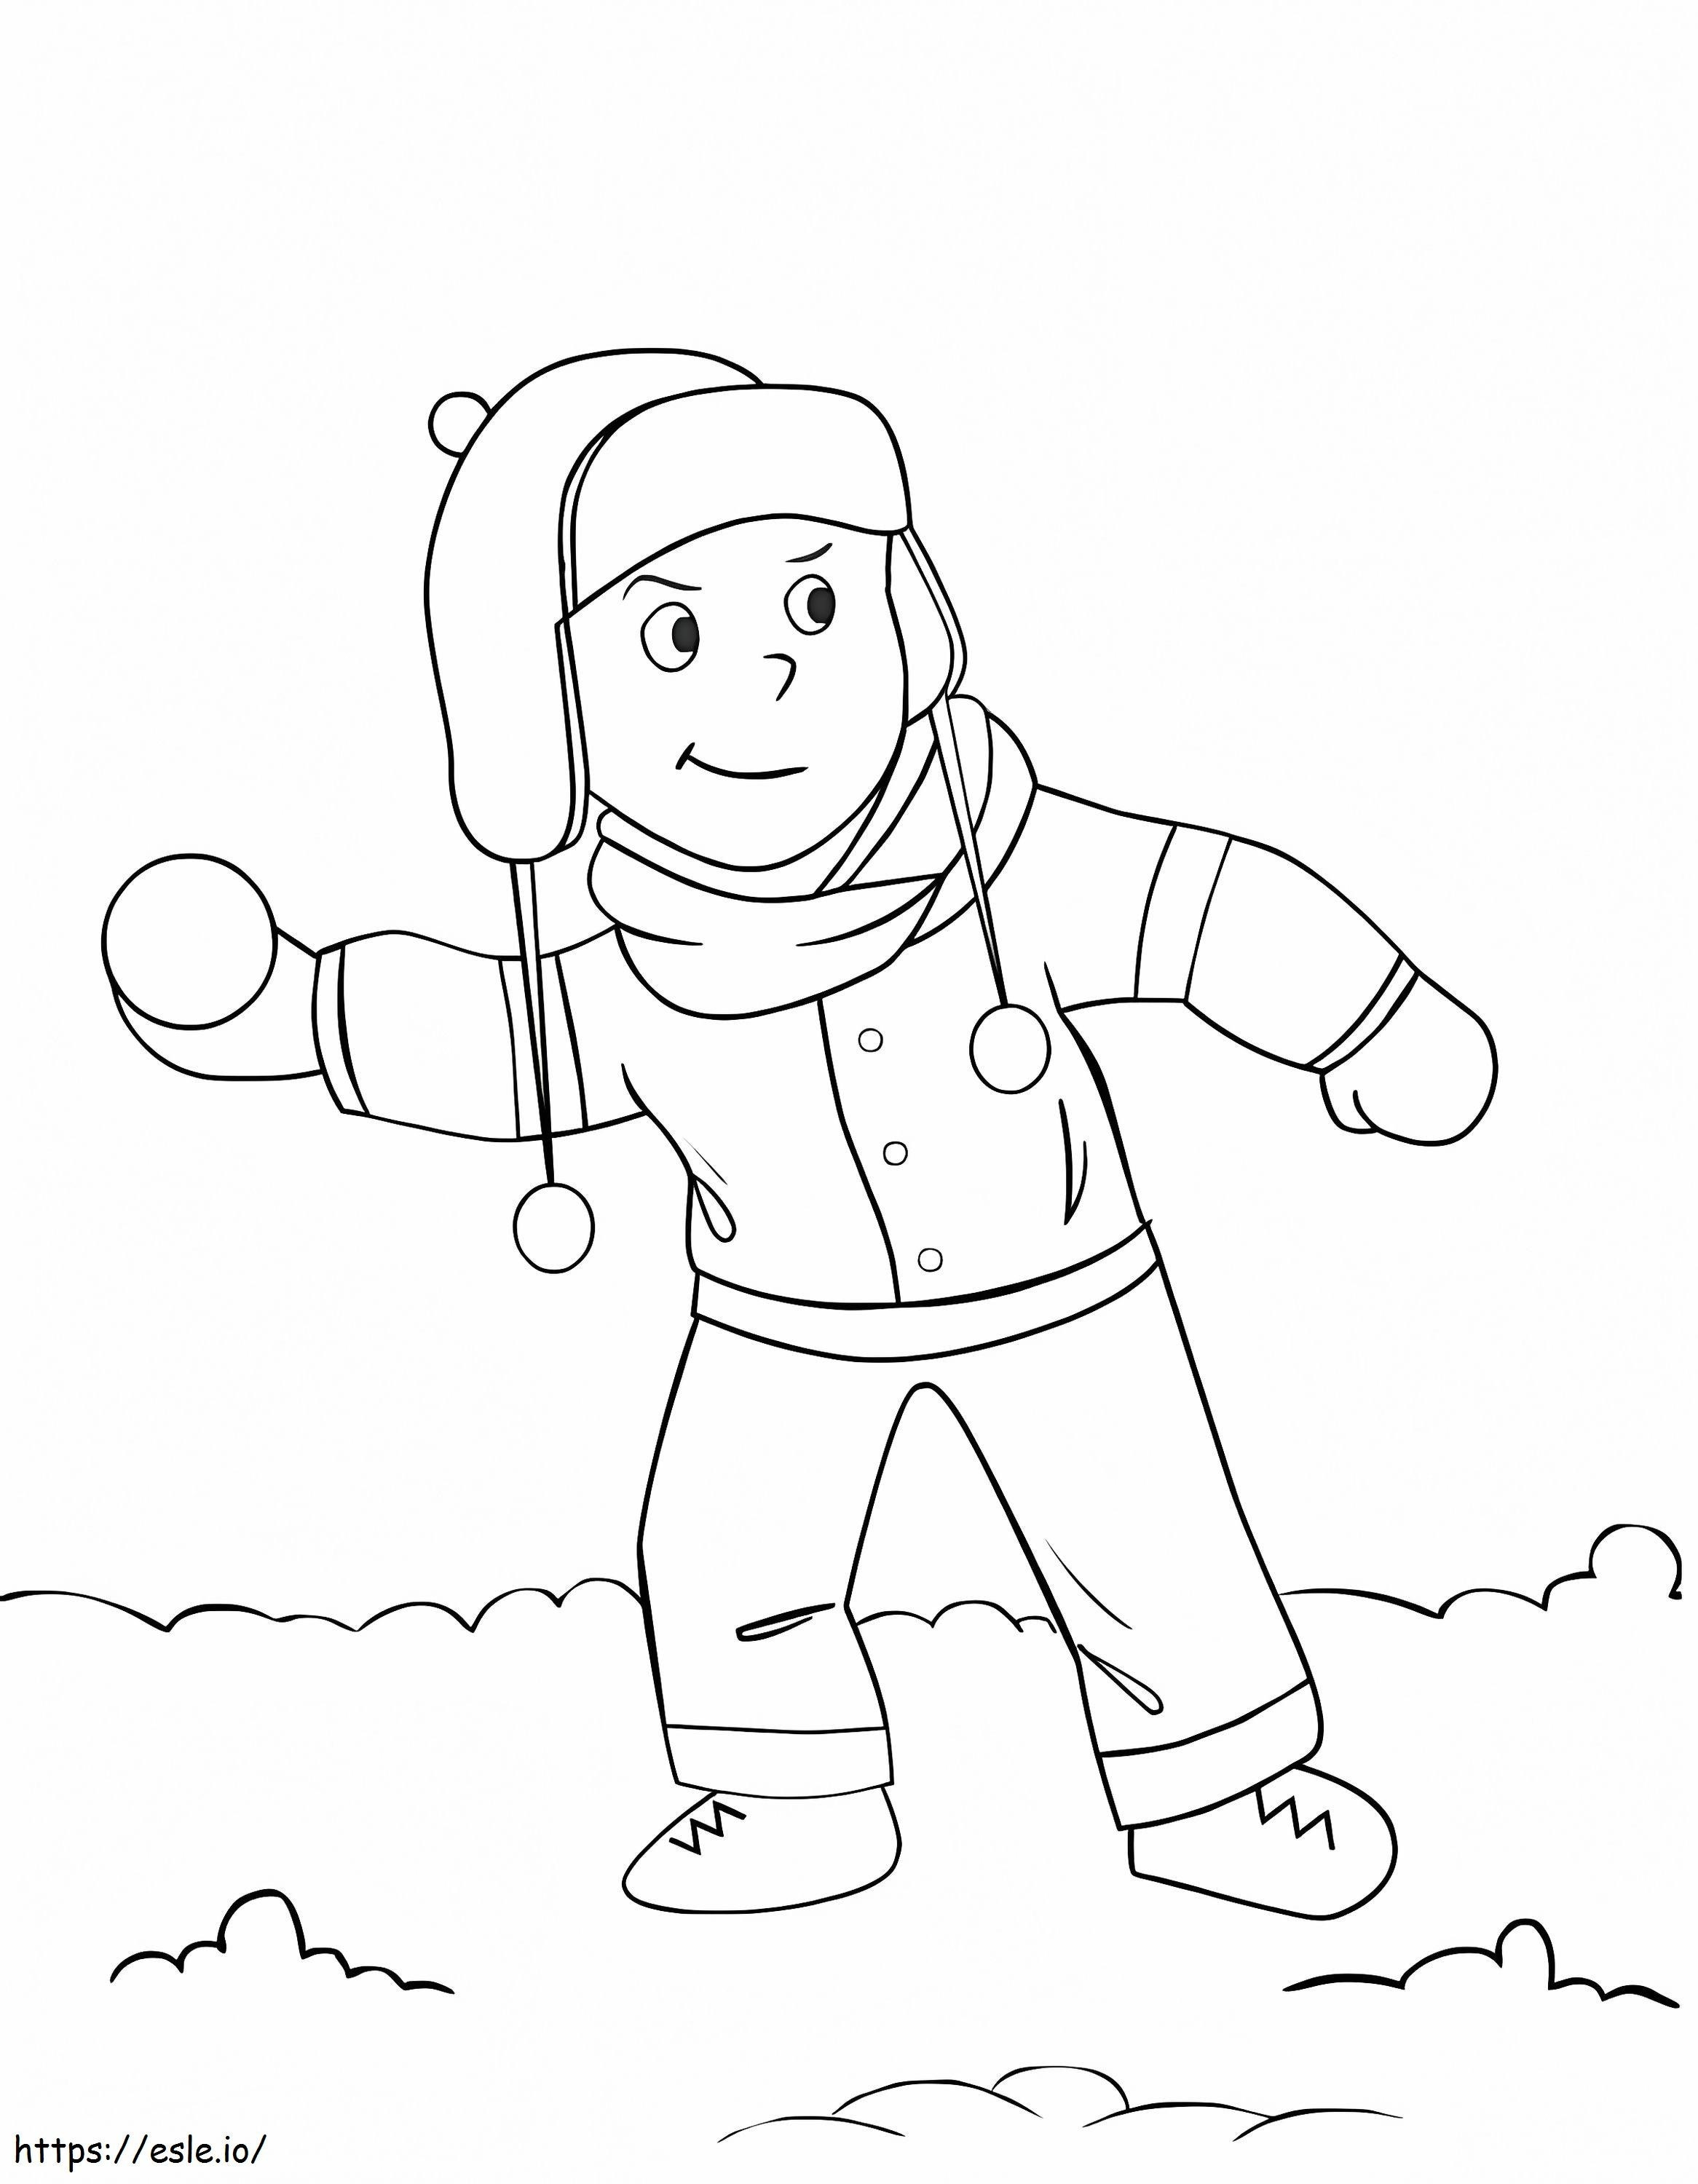 A Boy In Snowball Fight coloring page